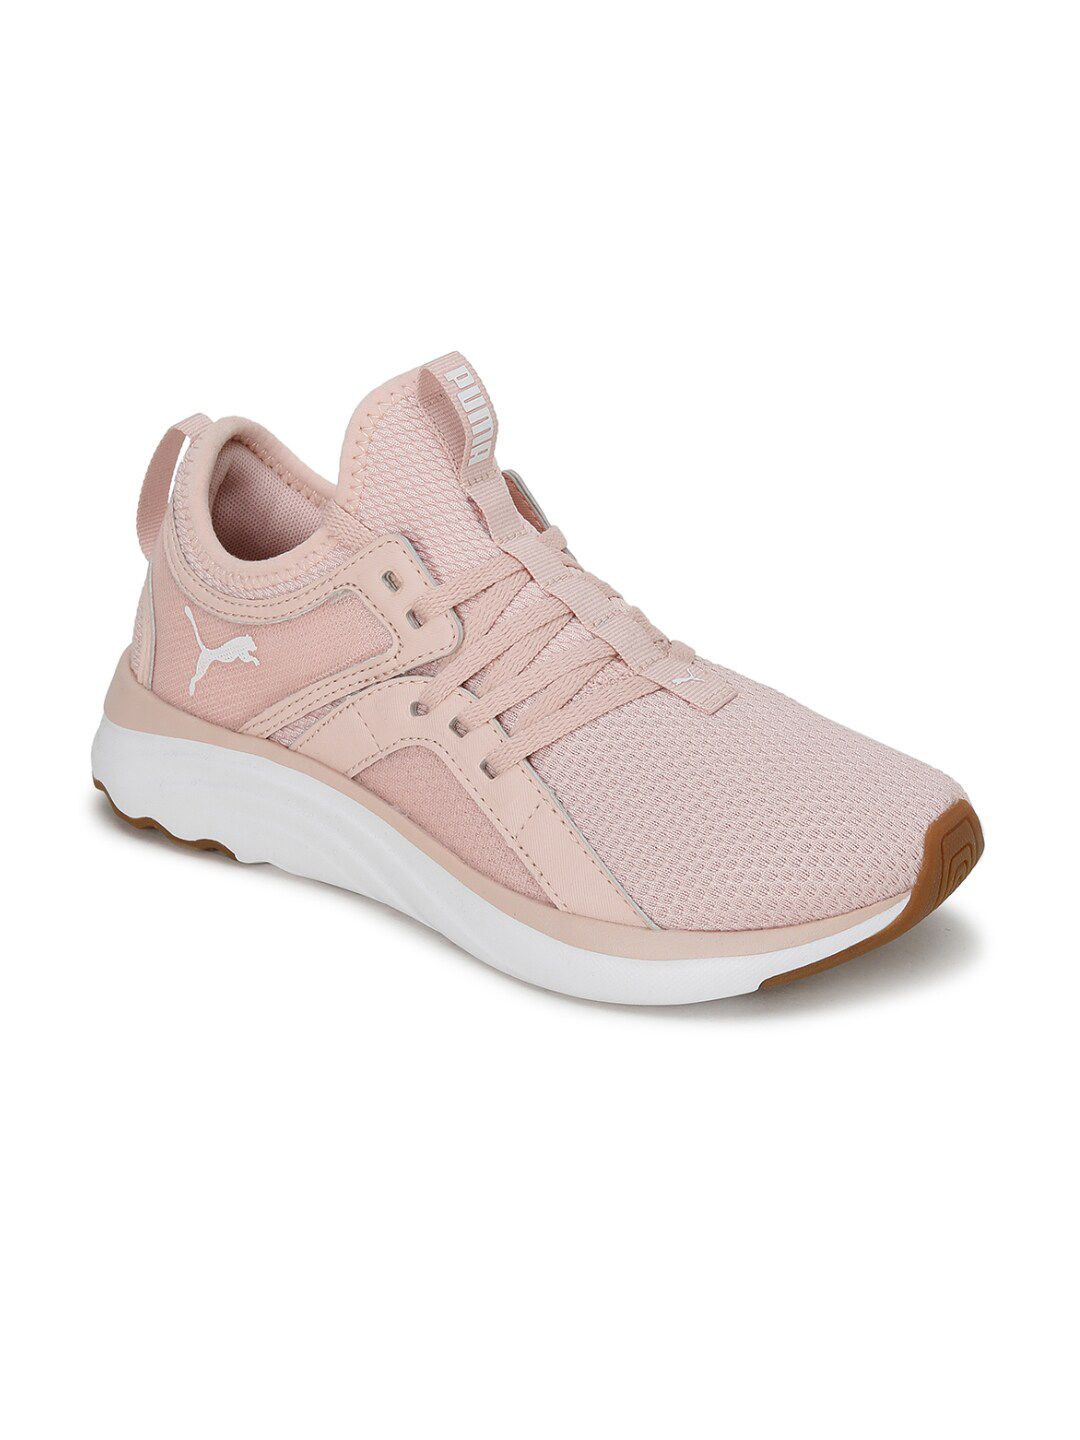 Puma Women Pink Softride Sophia Wn's Textile Running Shoes Price in India